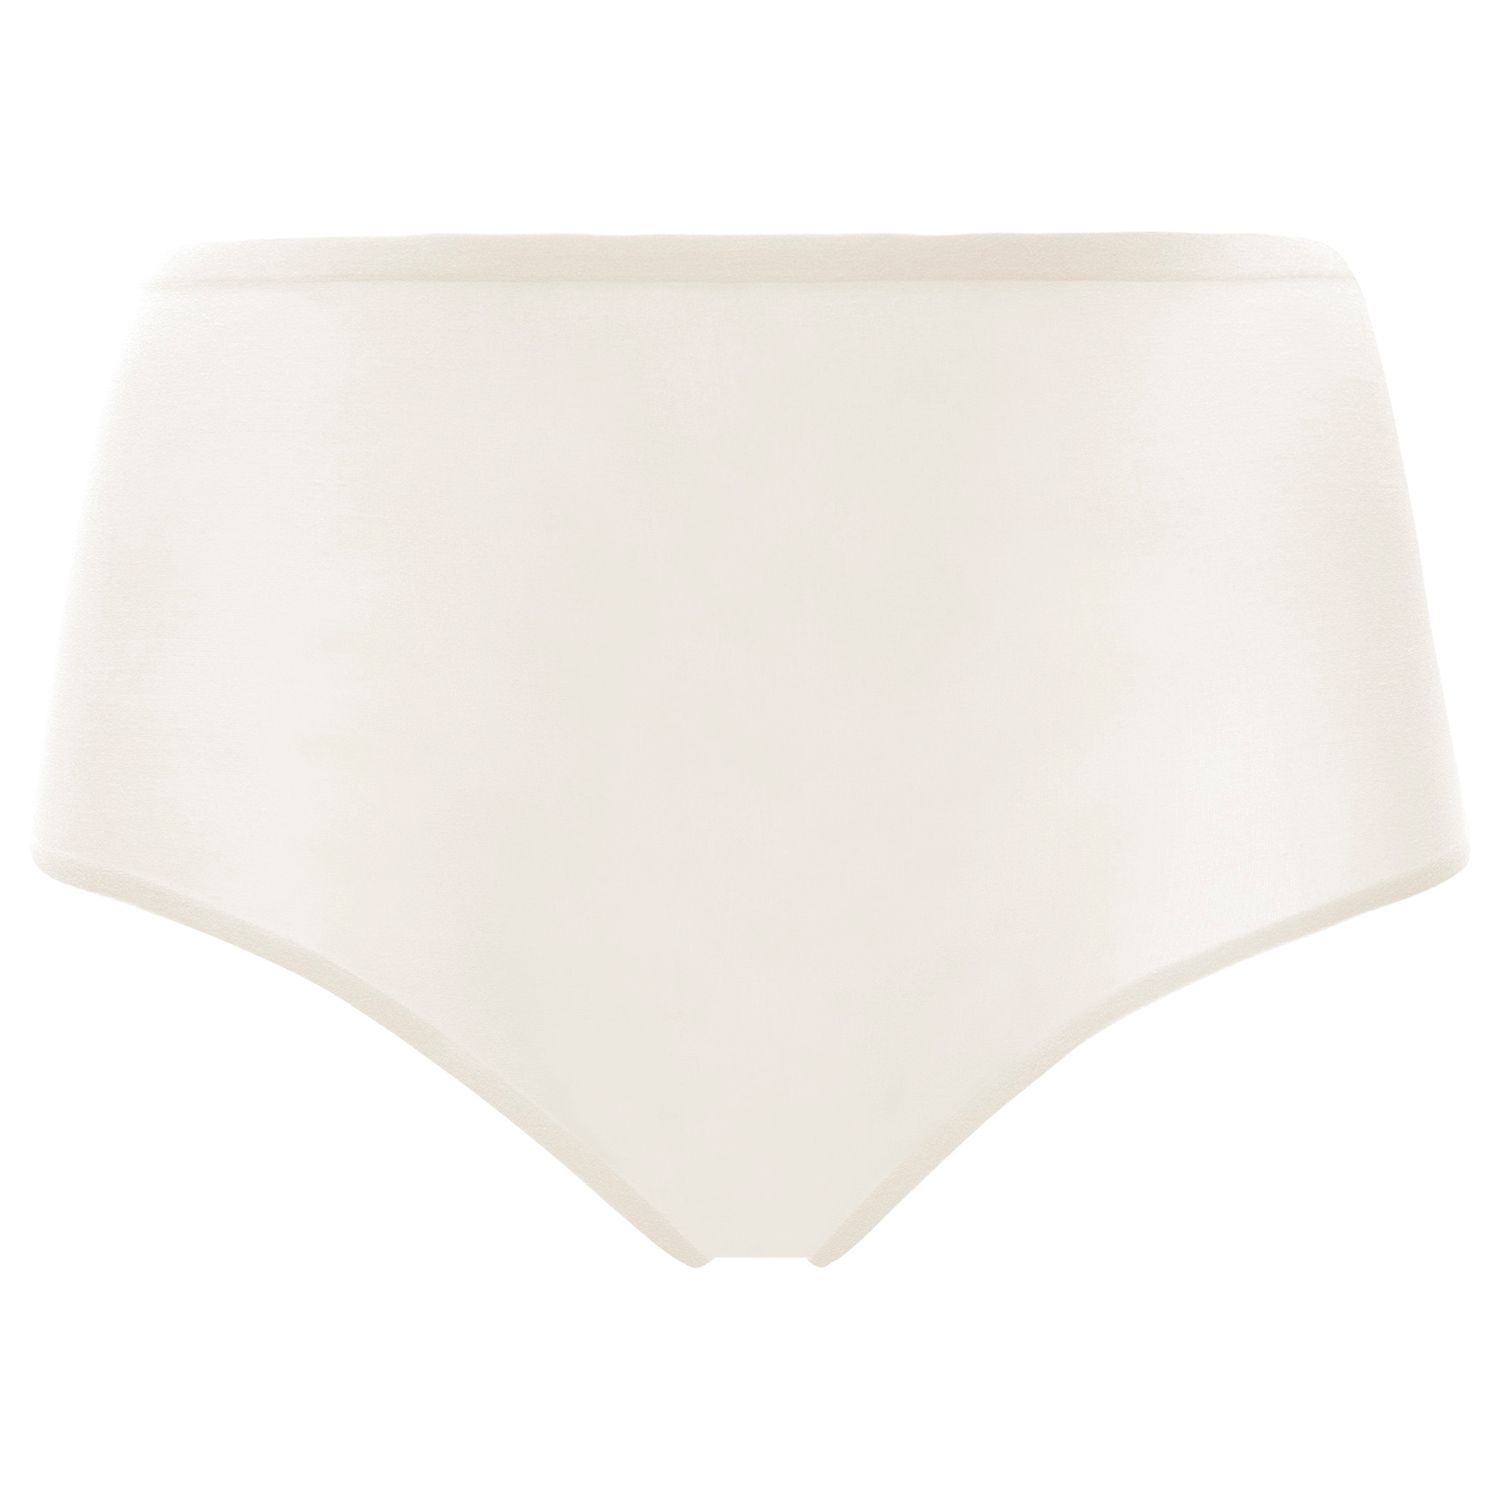 Chantelle Soft Stretch High Waisted Knickers, Ivory, One Size